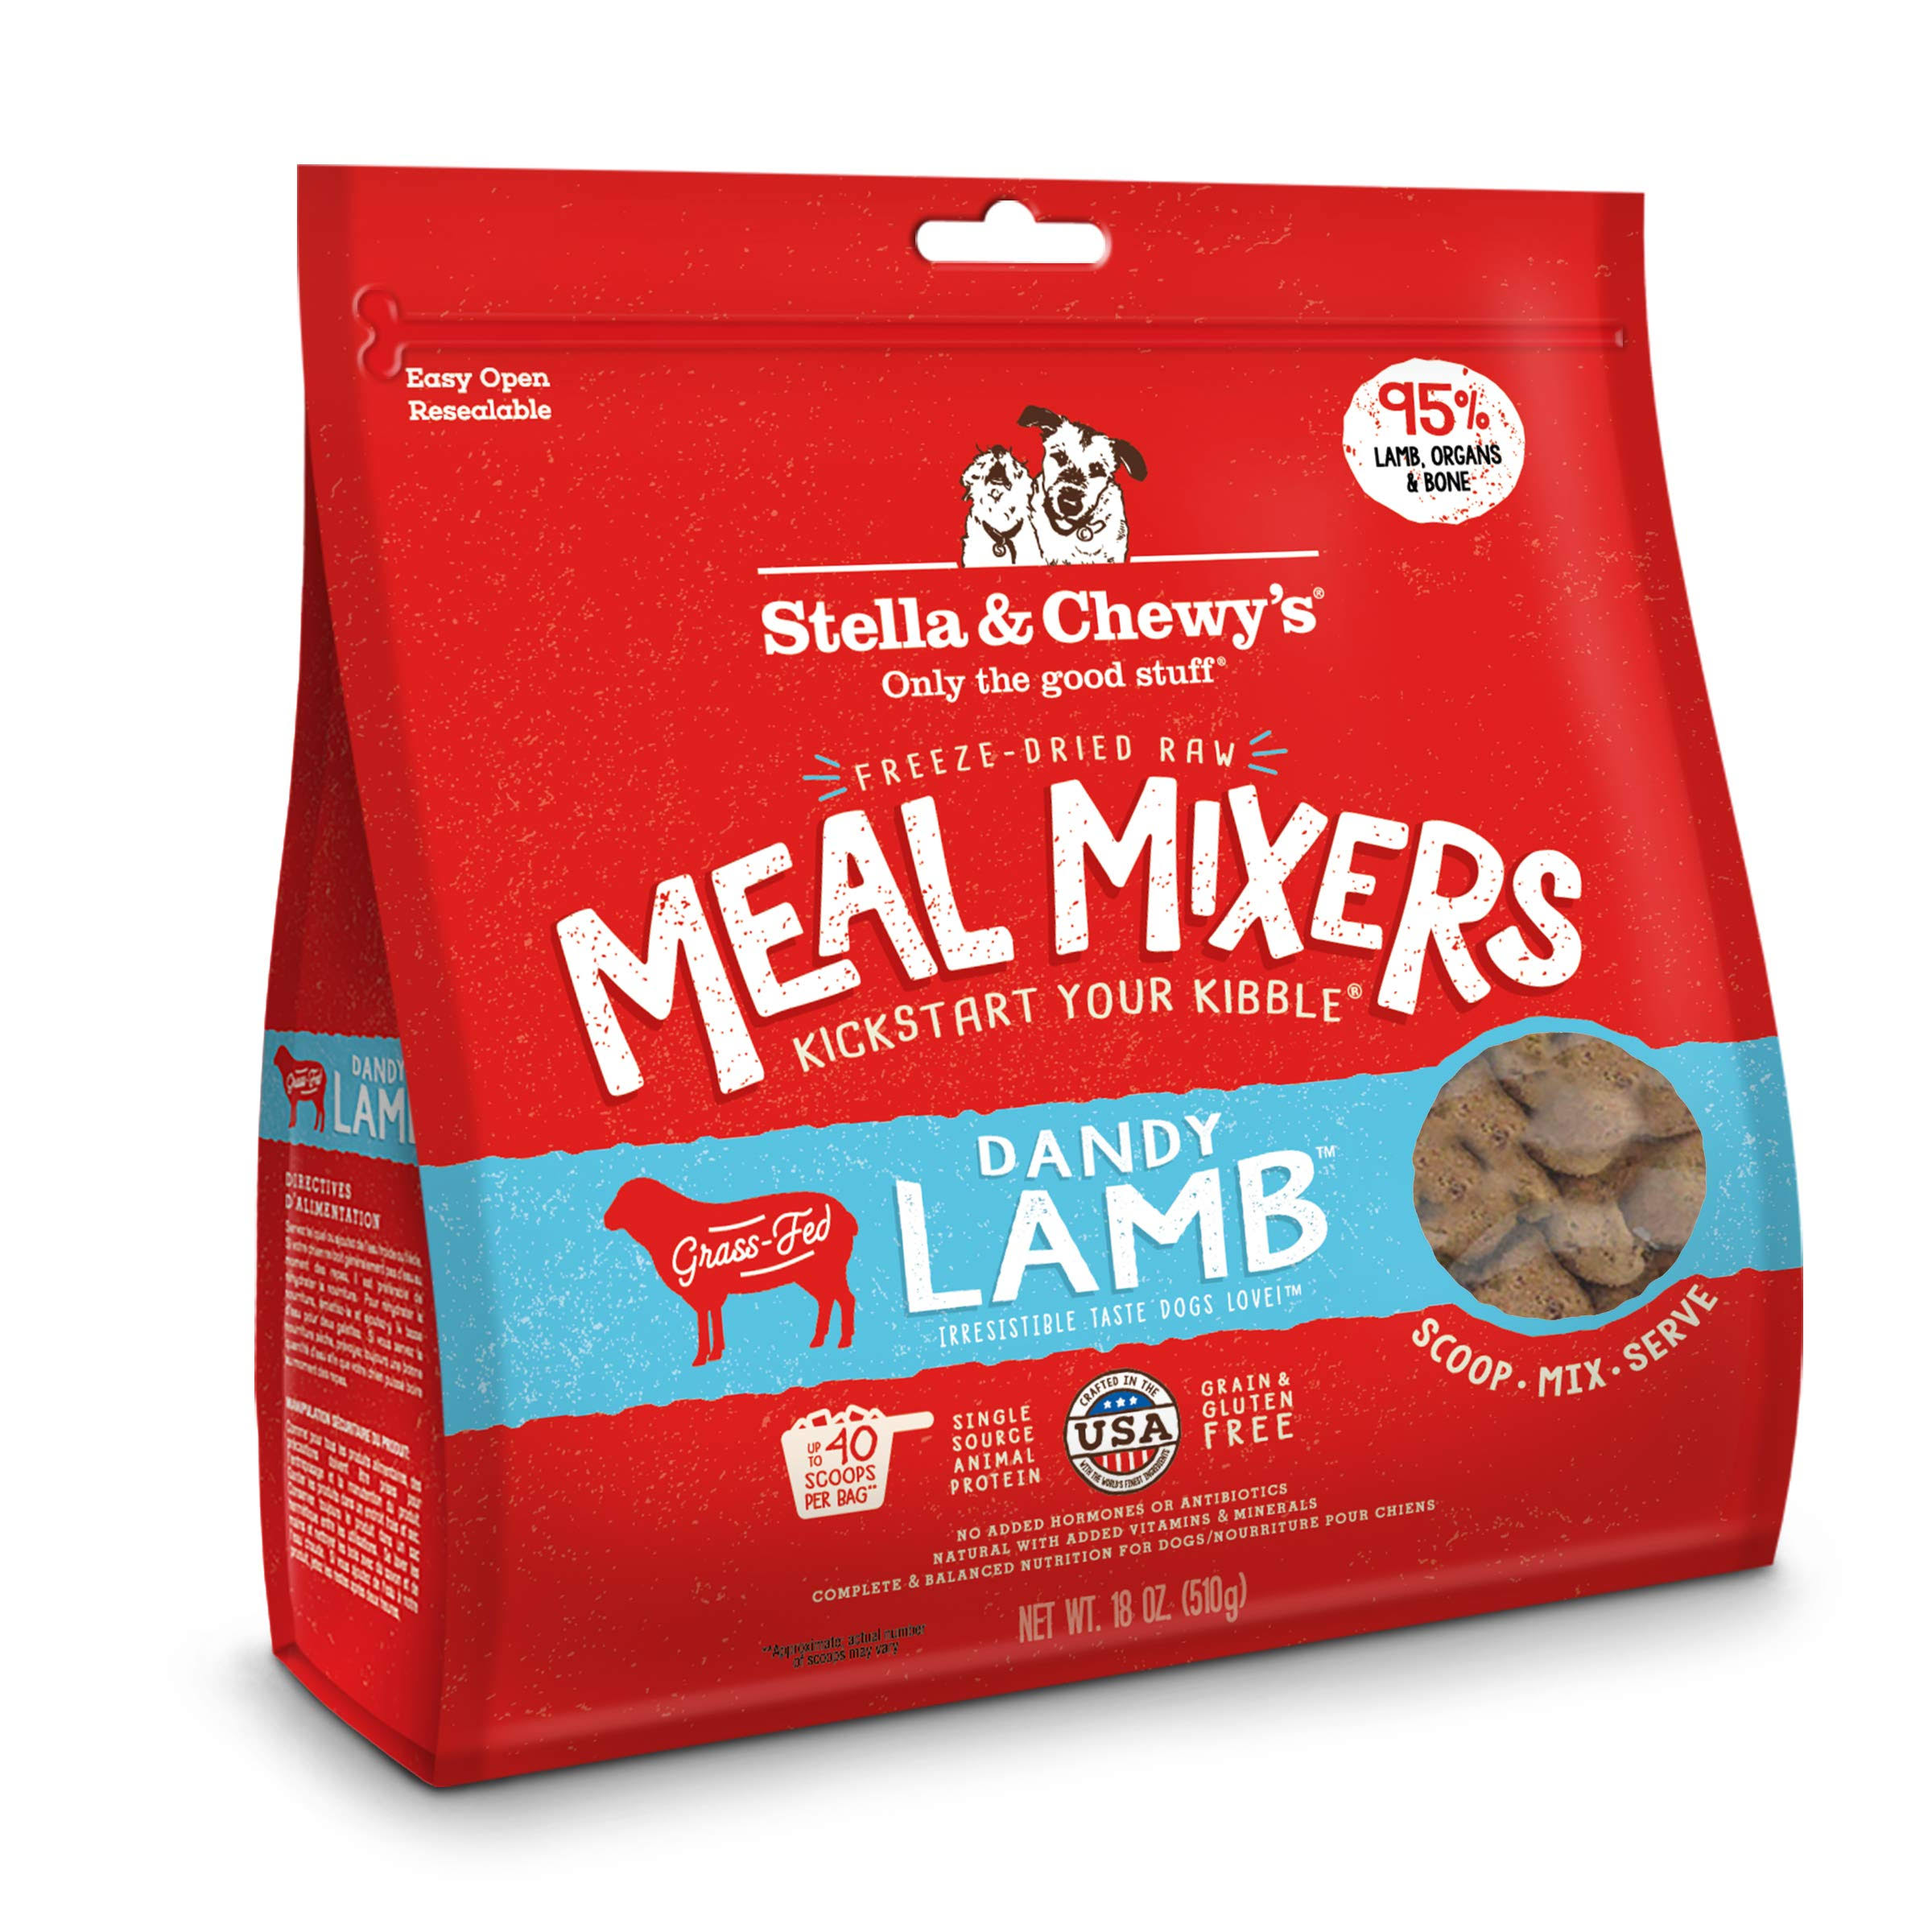 Stella & Chewy's Dandy Lamb Freeze Dried Meal Mixers 18 oz | Dog Food